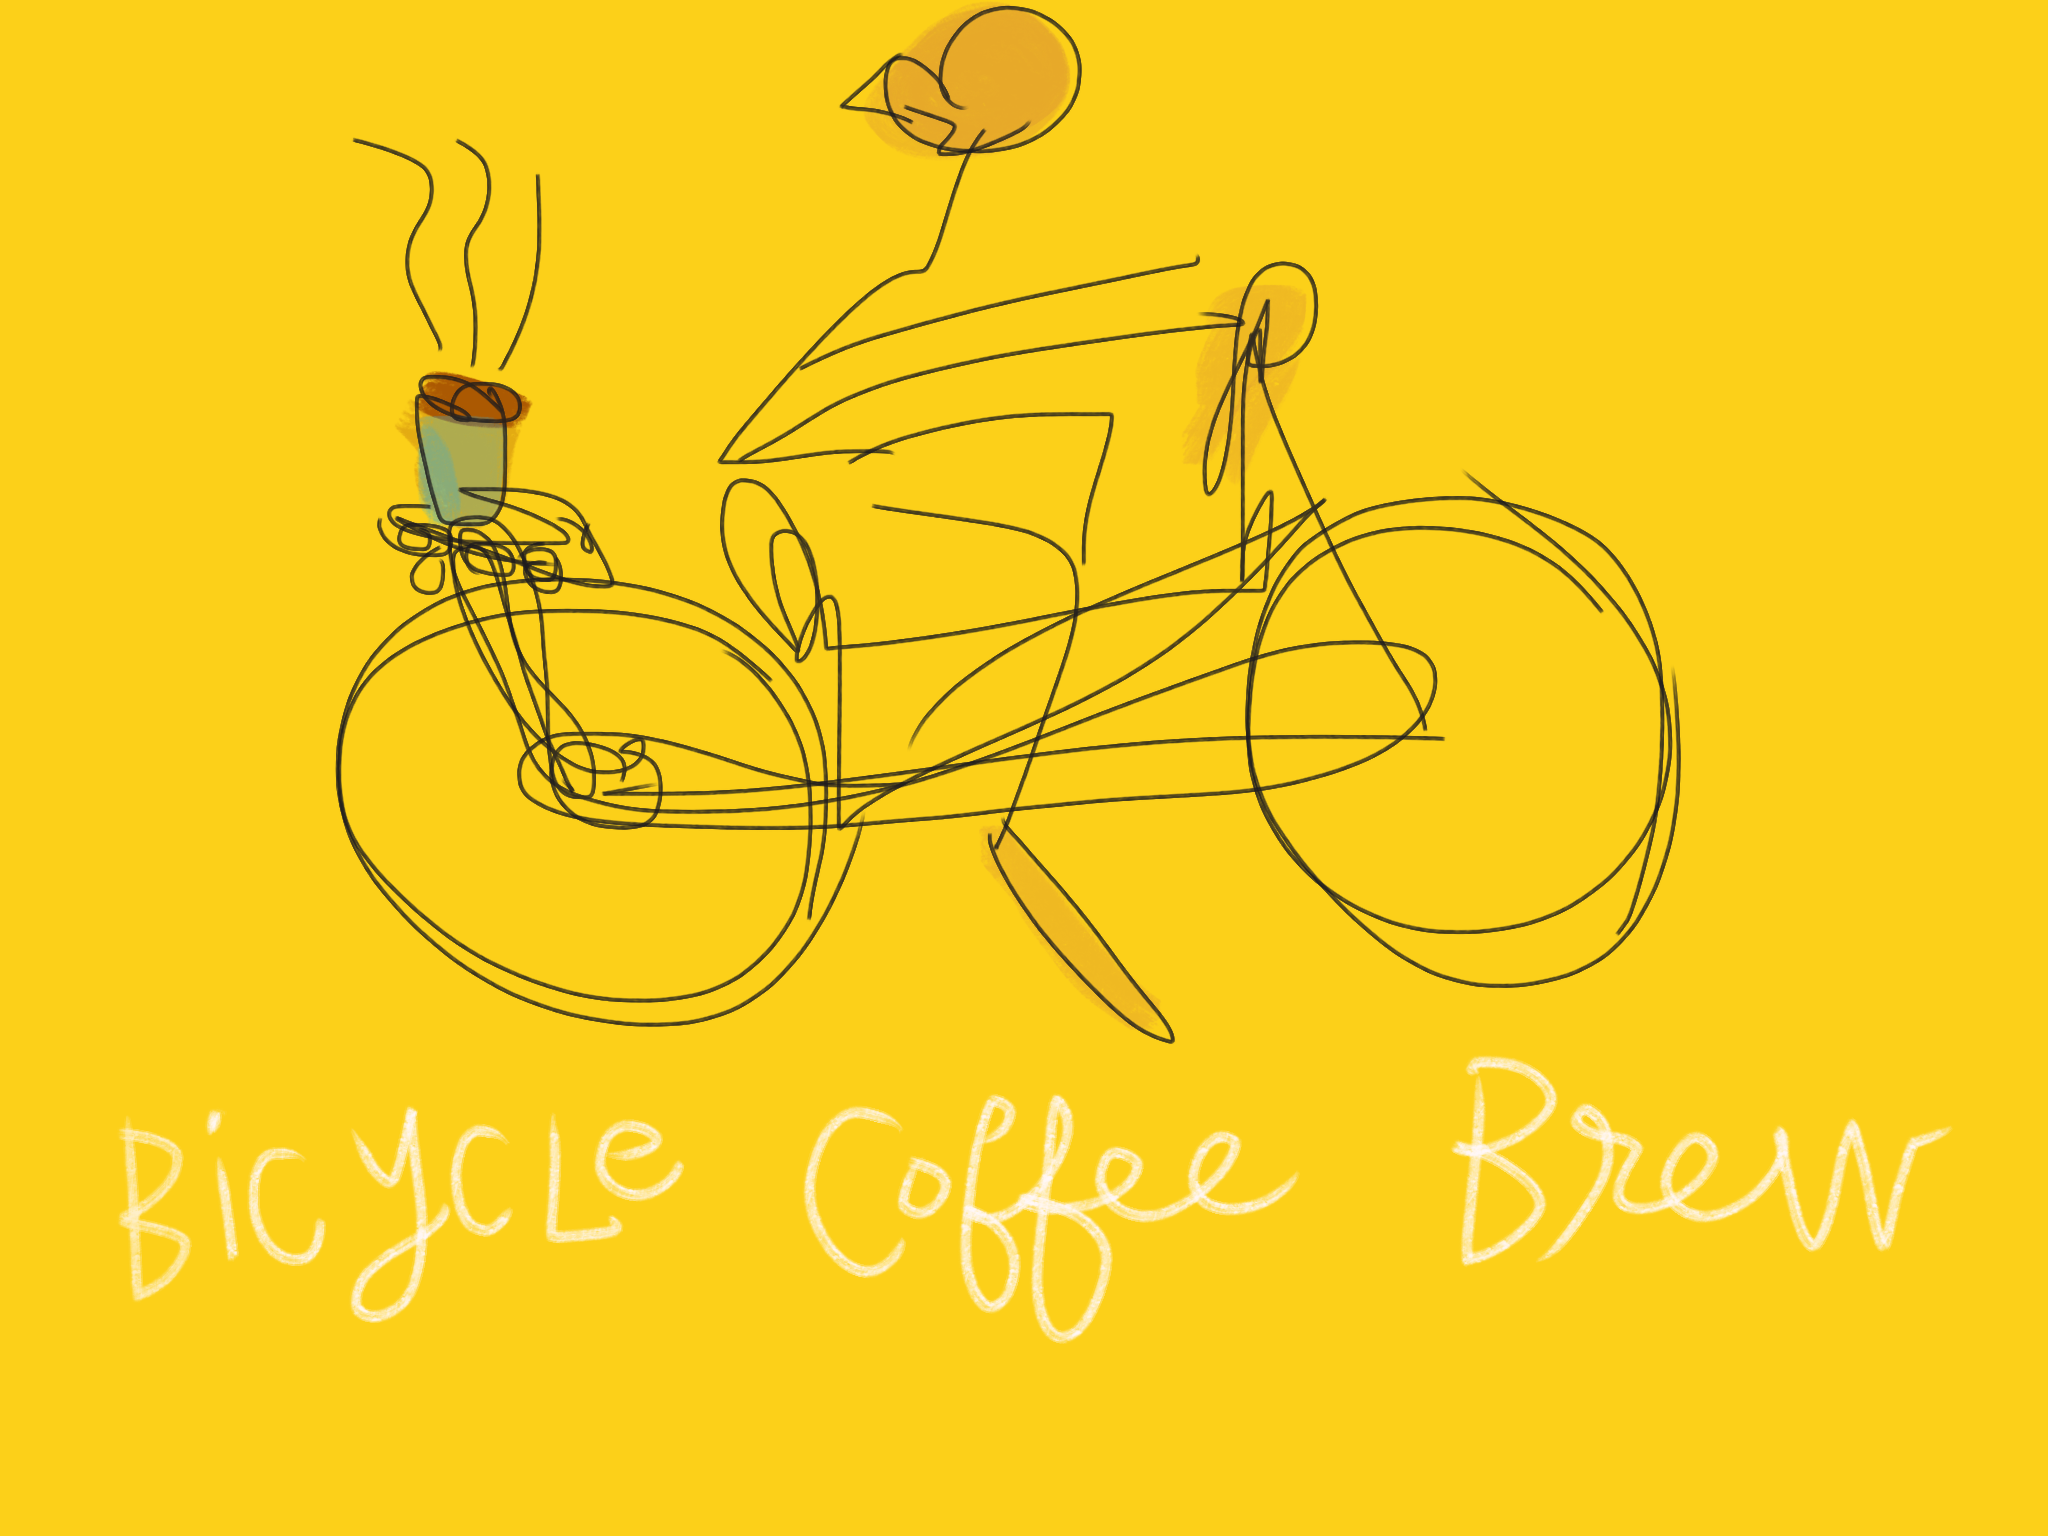 Bicycle Coffee Brew